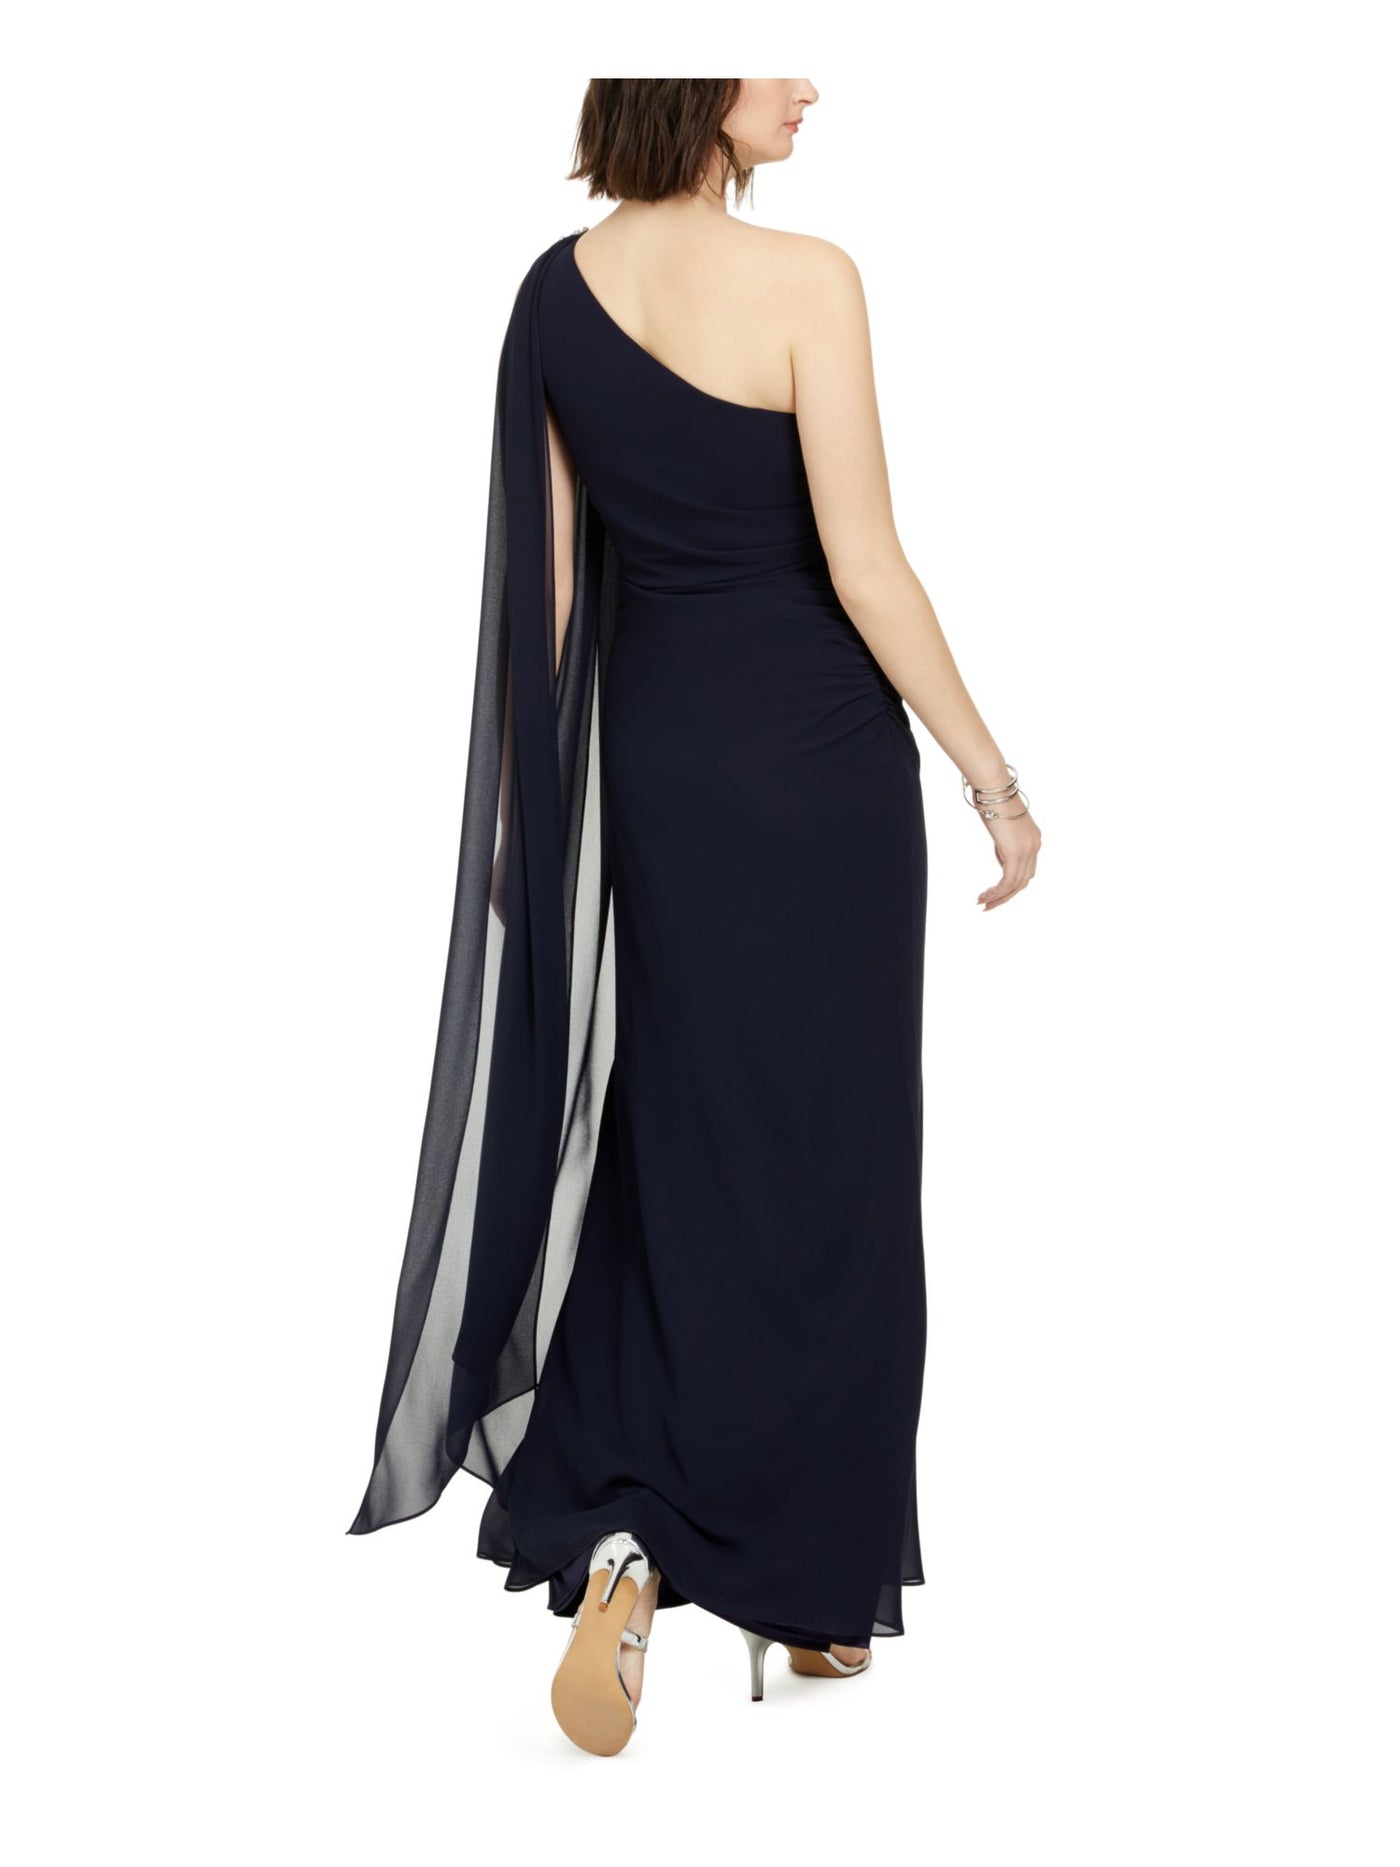 VINCE CAMUTO Womens Navy Stretch Embellished Zippered One-shoulder Chiffon Gown Sleeveless Asymmetrical Neckline Maxi Formal Dress Petites 2P